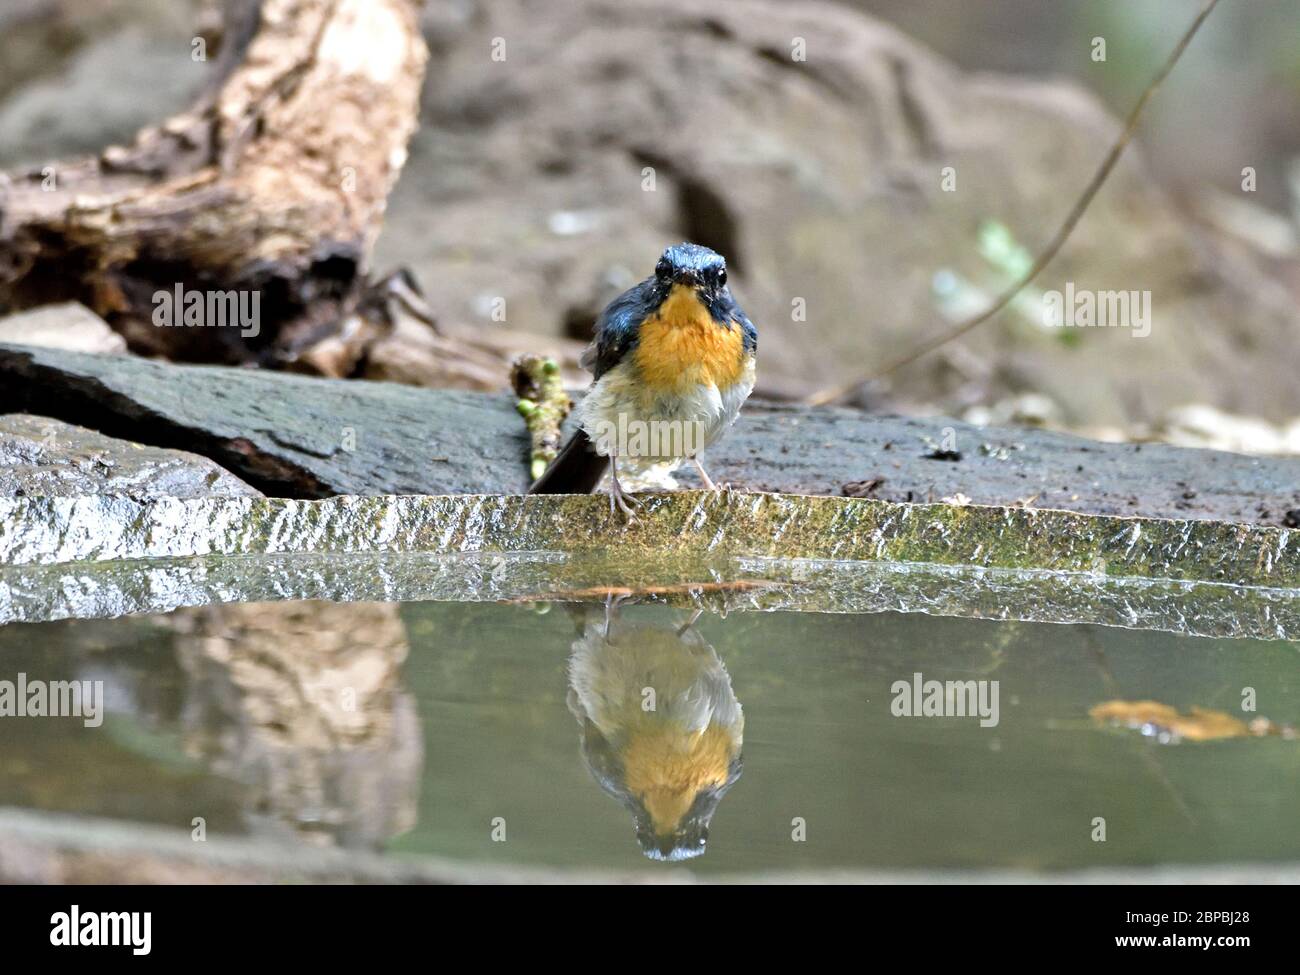 A male Indochinese Blue Flycatcher (Cyornis sumatrensis) reflected in a pool in the forest in Western Thailand Stock Photo